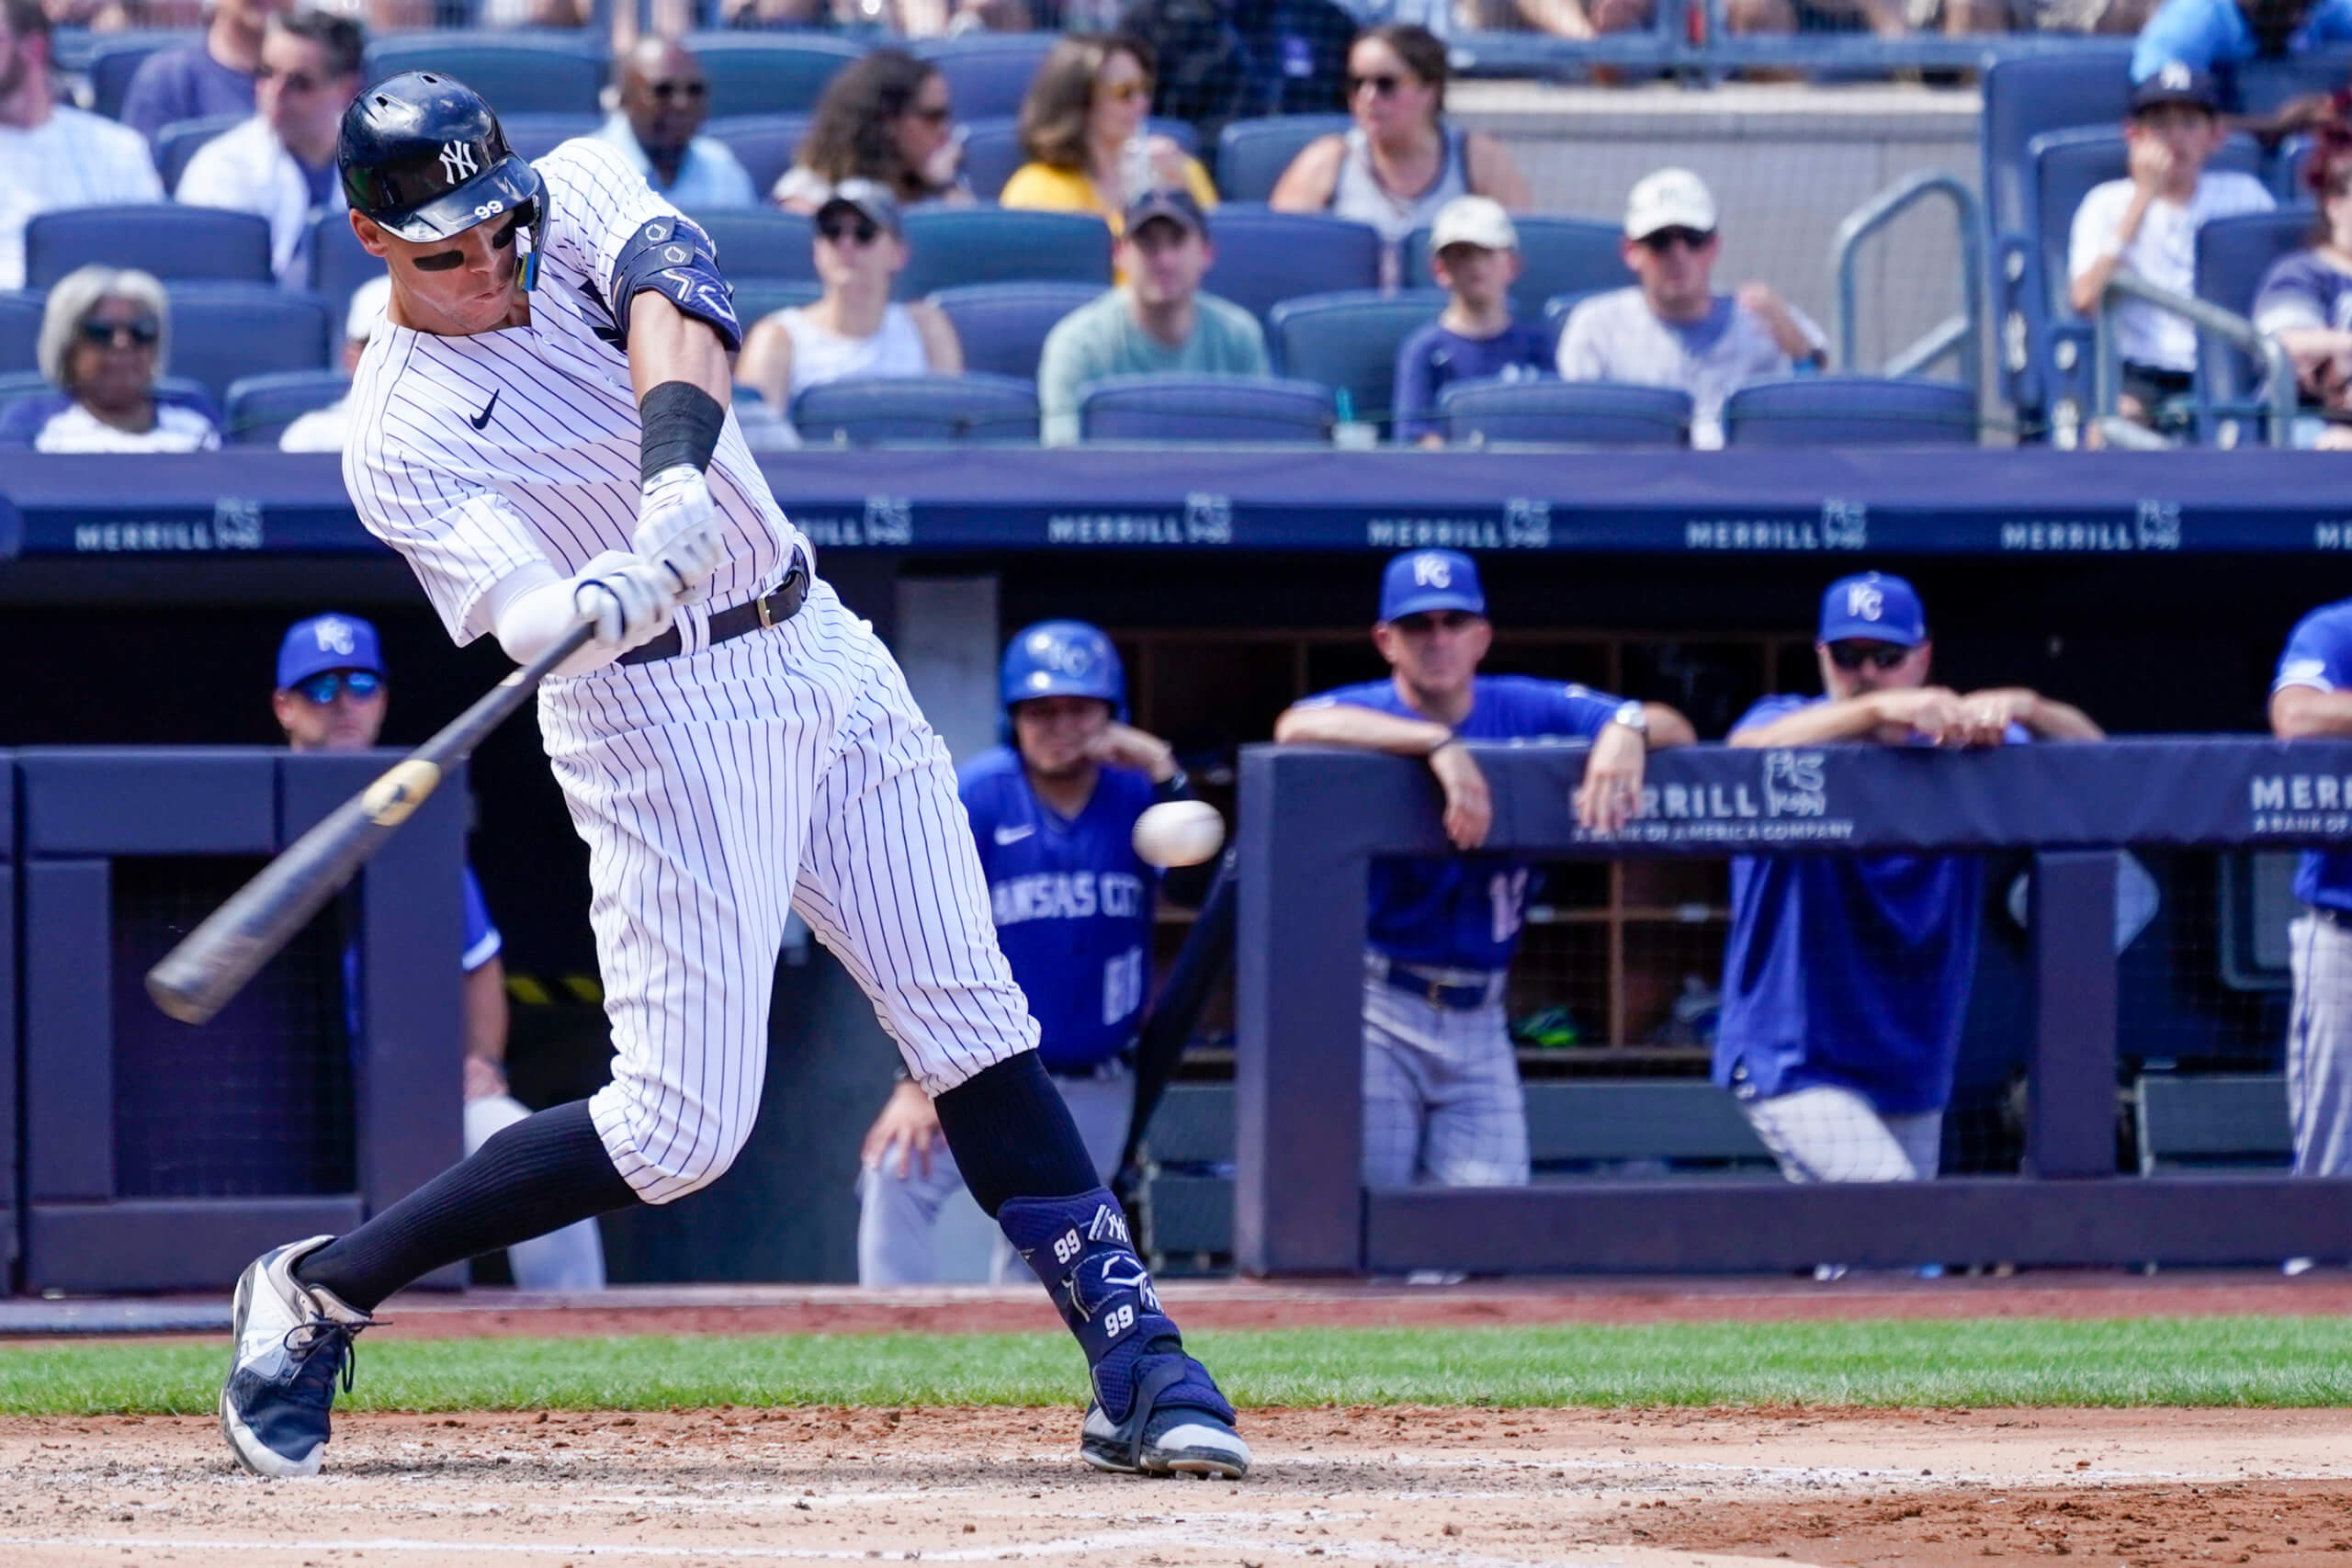 Speed demon Anthony Rizzo flashes base running prowess for New York Yankees